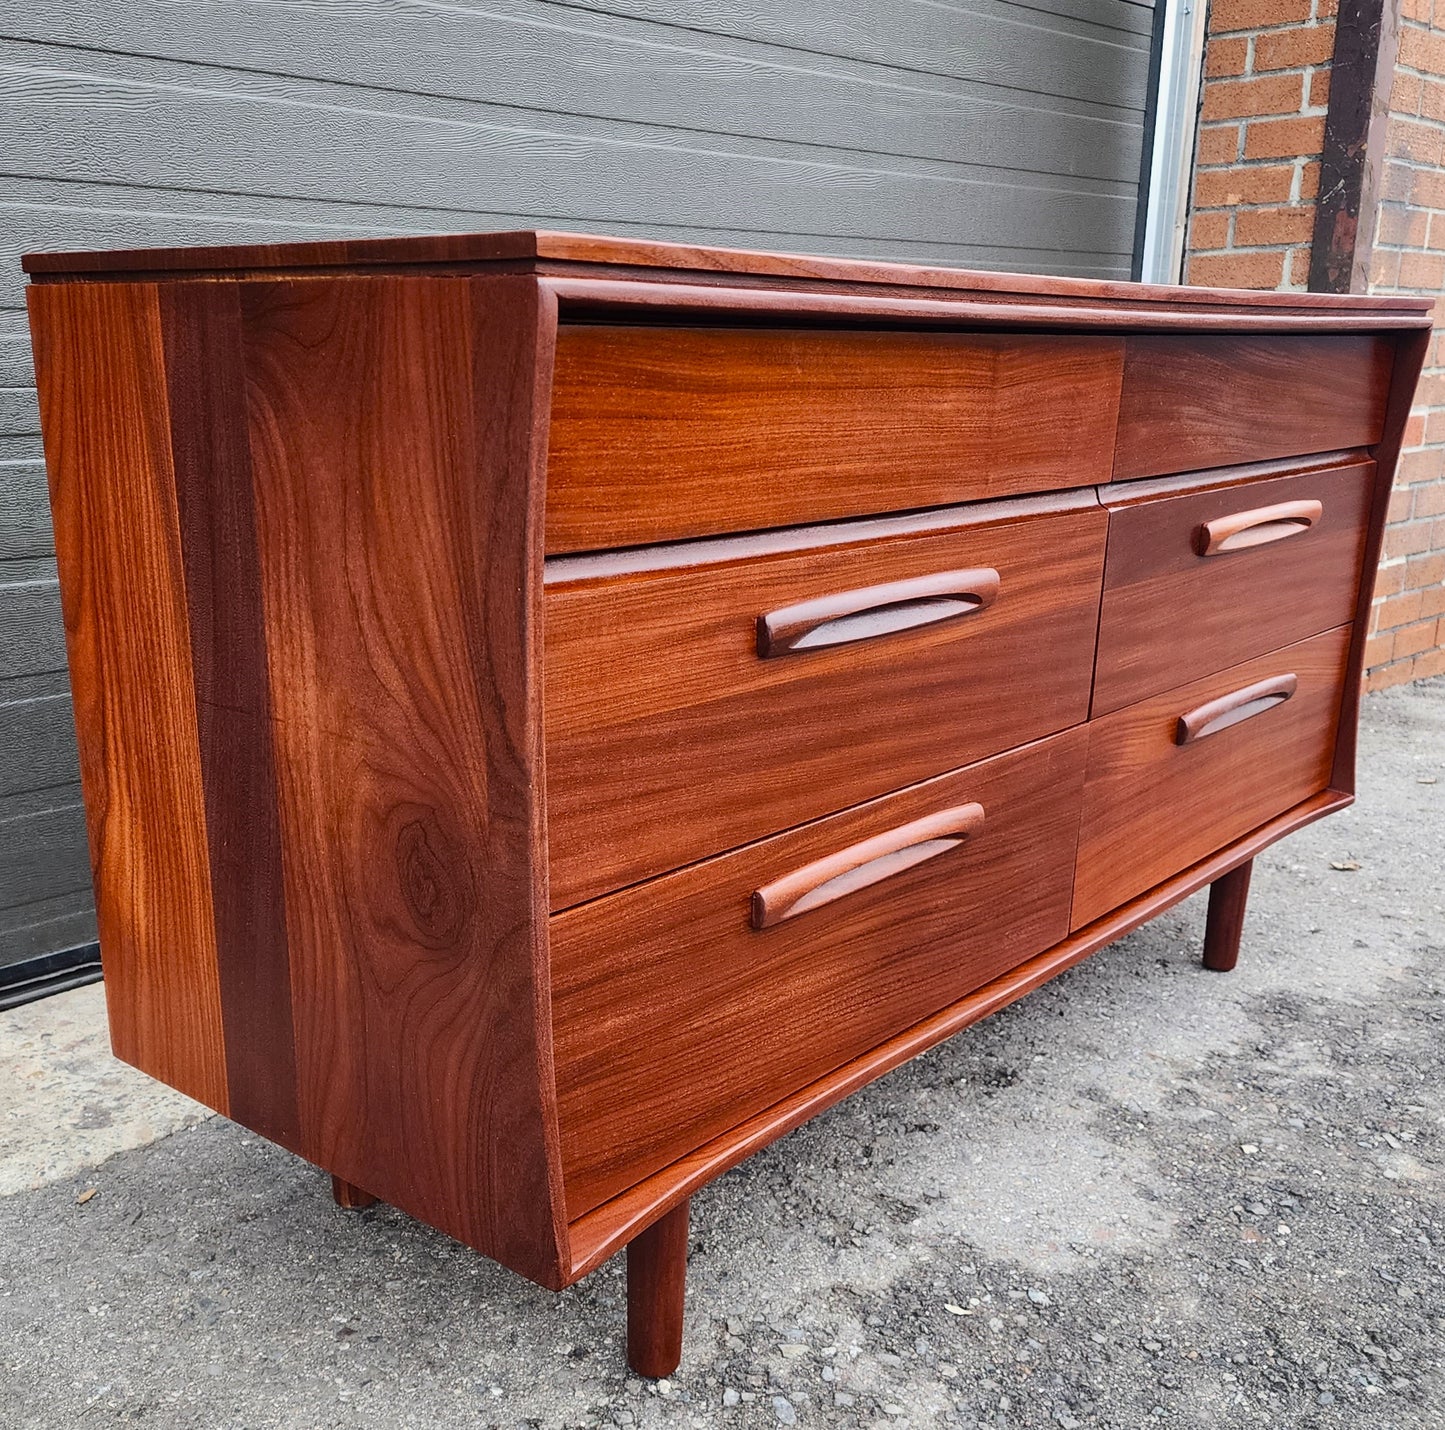 REFINISHED Mid Century Modern SOLID TEAK Afromosia Dresser by Imperial